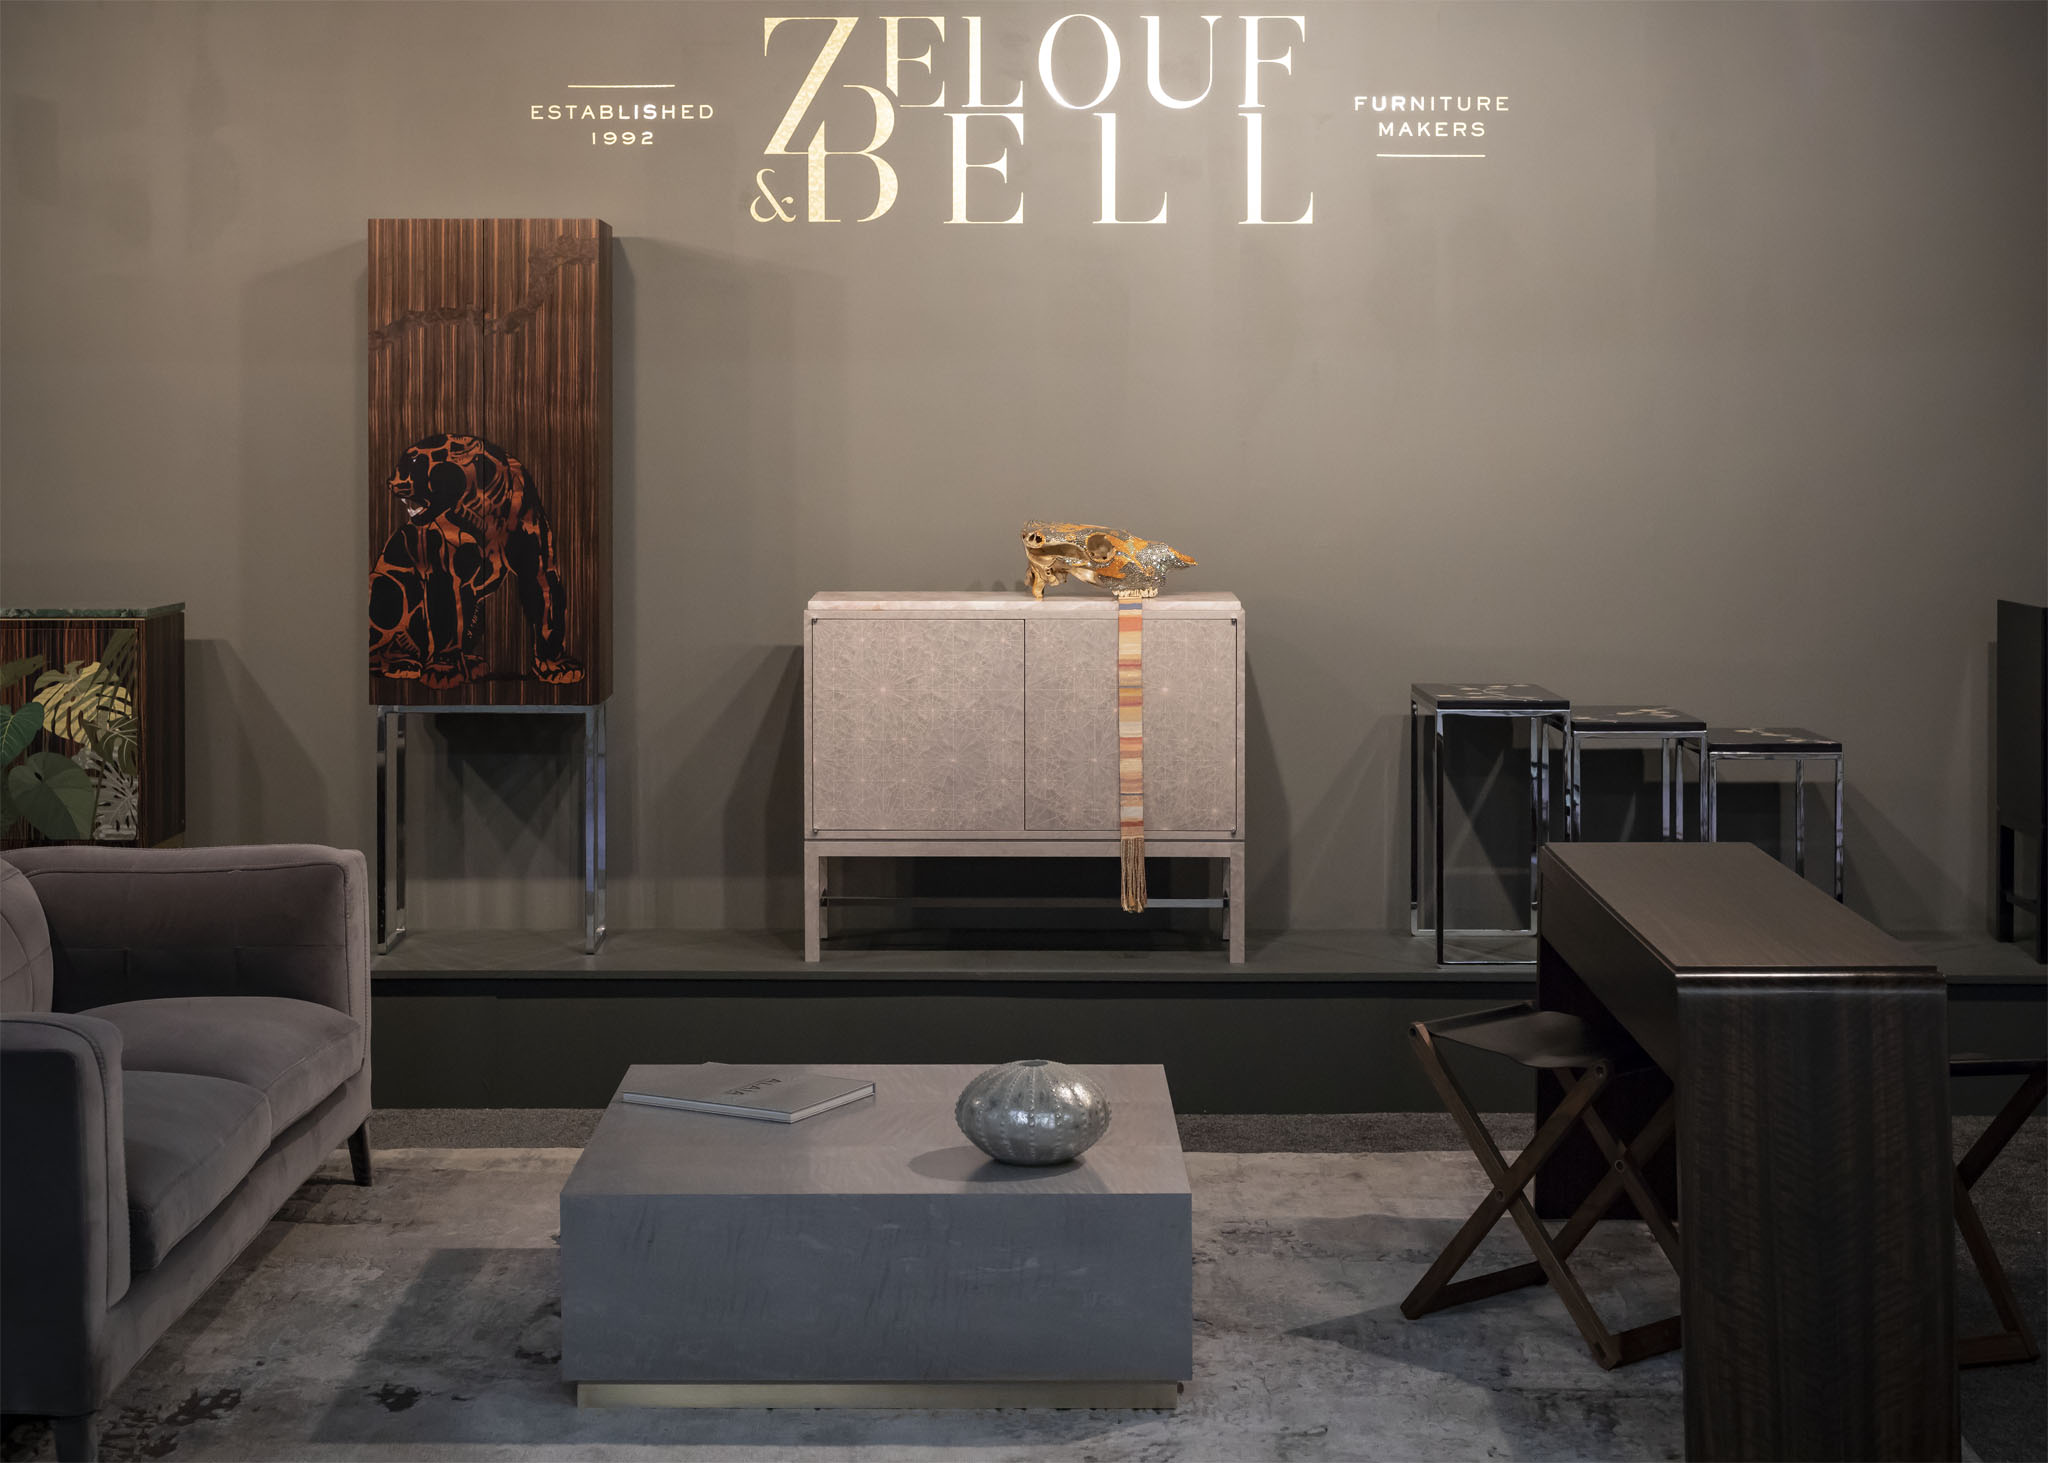 Zelouf & Bell Furniture Makers